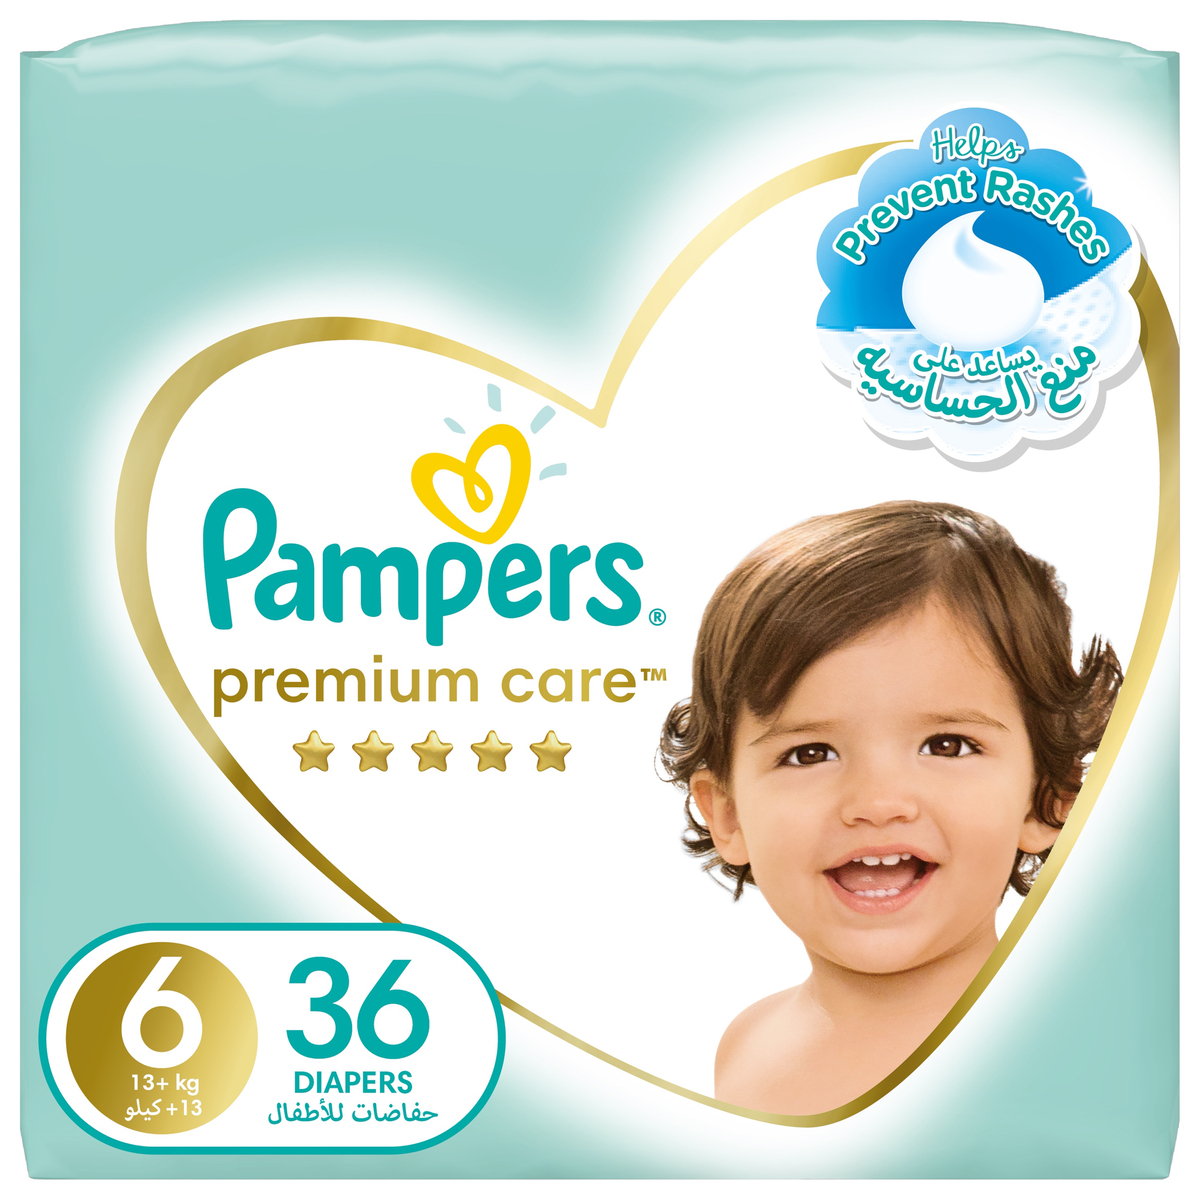 opladen Majestueus Tutor Pampers Premium Care Diapers Size 6, 13+kg The Softest Diaper 36pcs Online  at Best Price | Baby Nappies | Lulu KSA